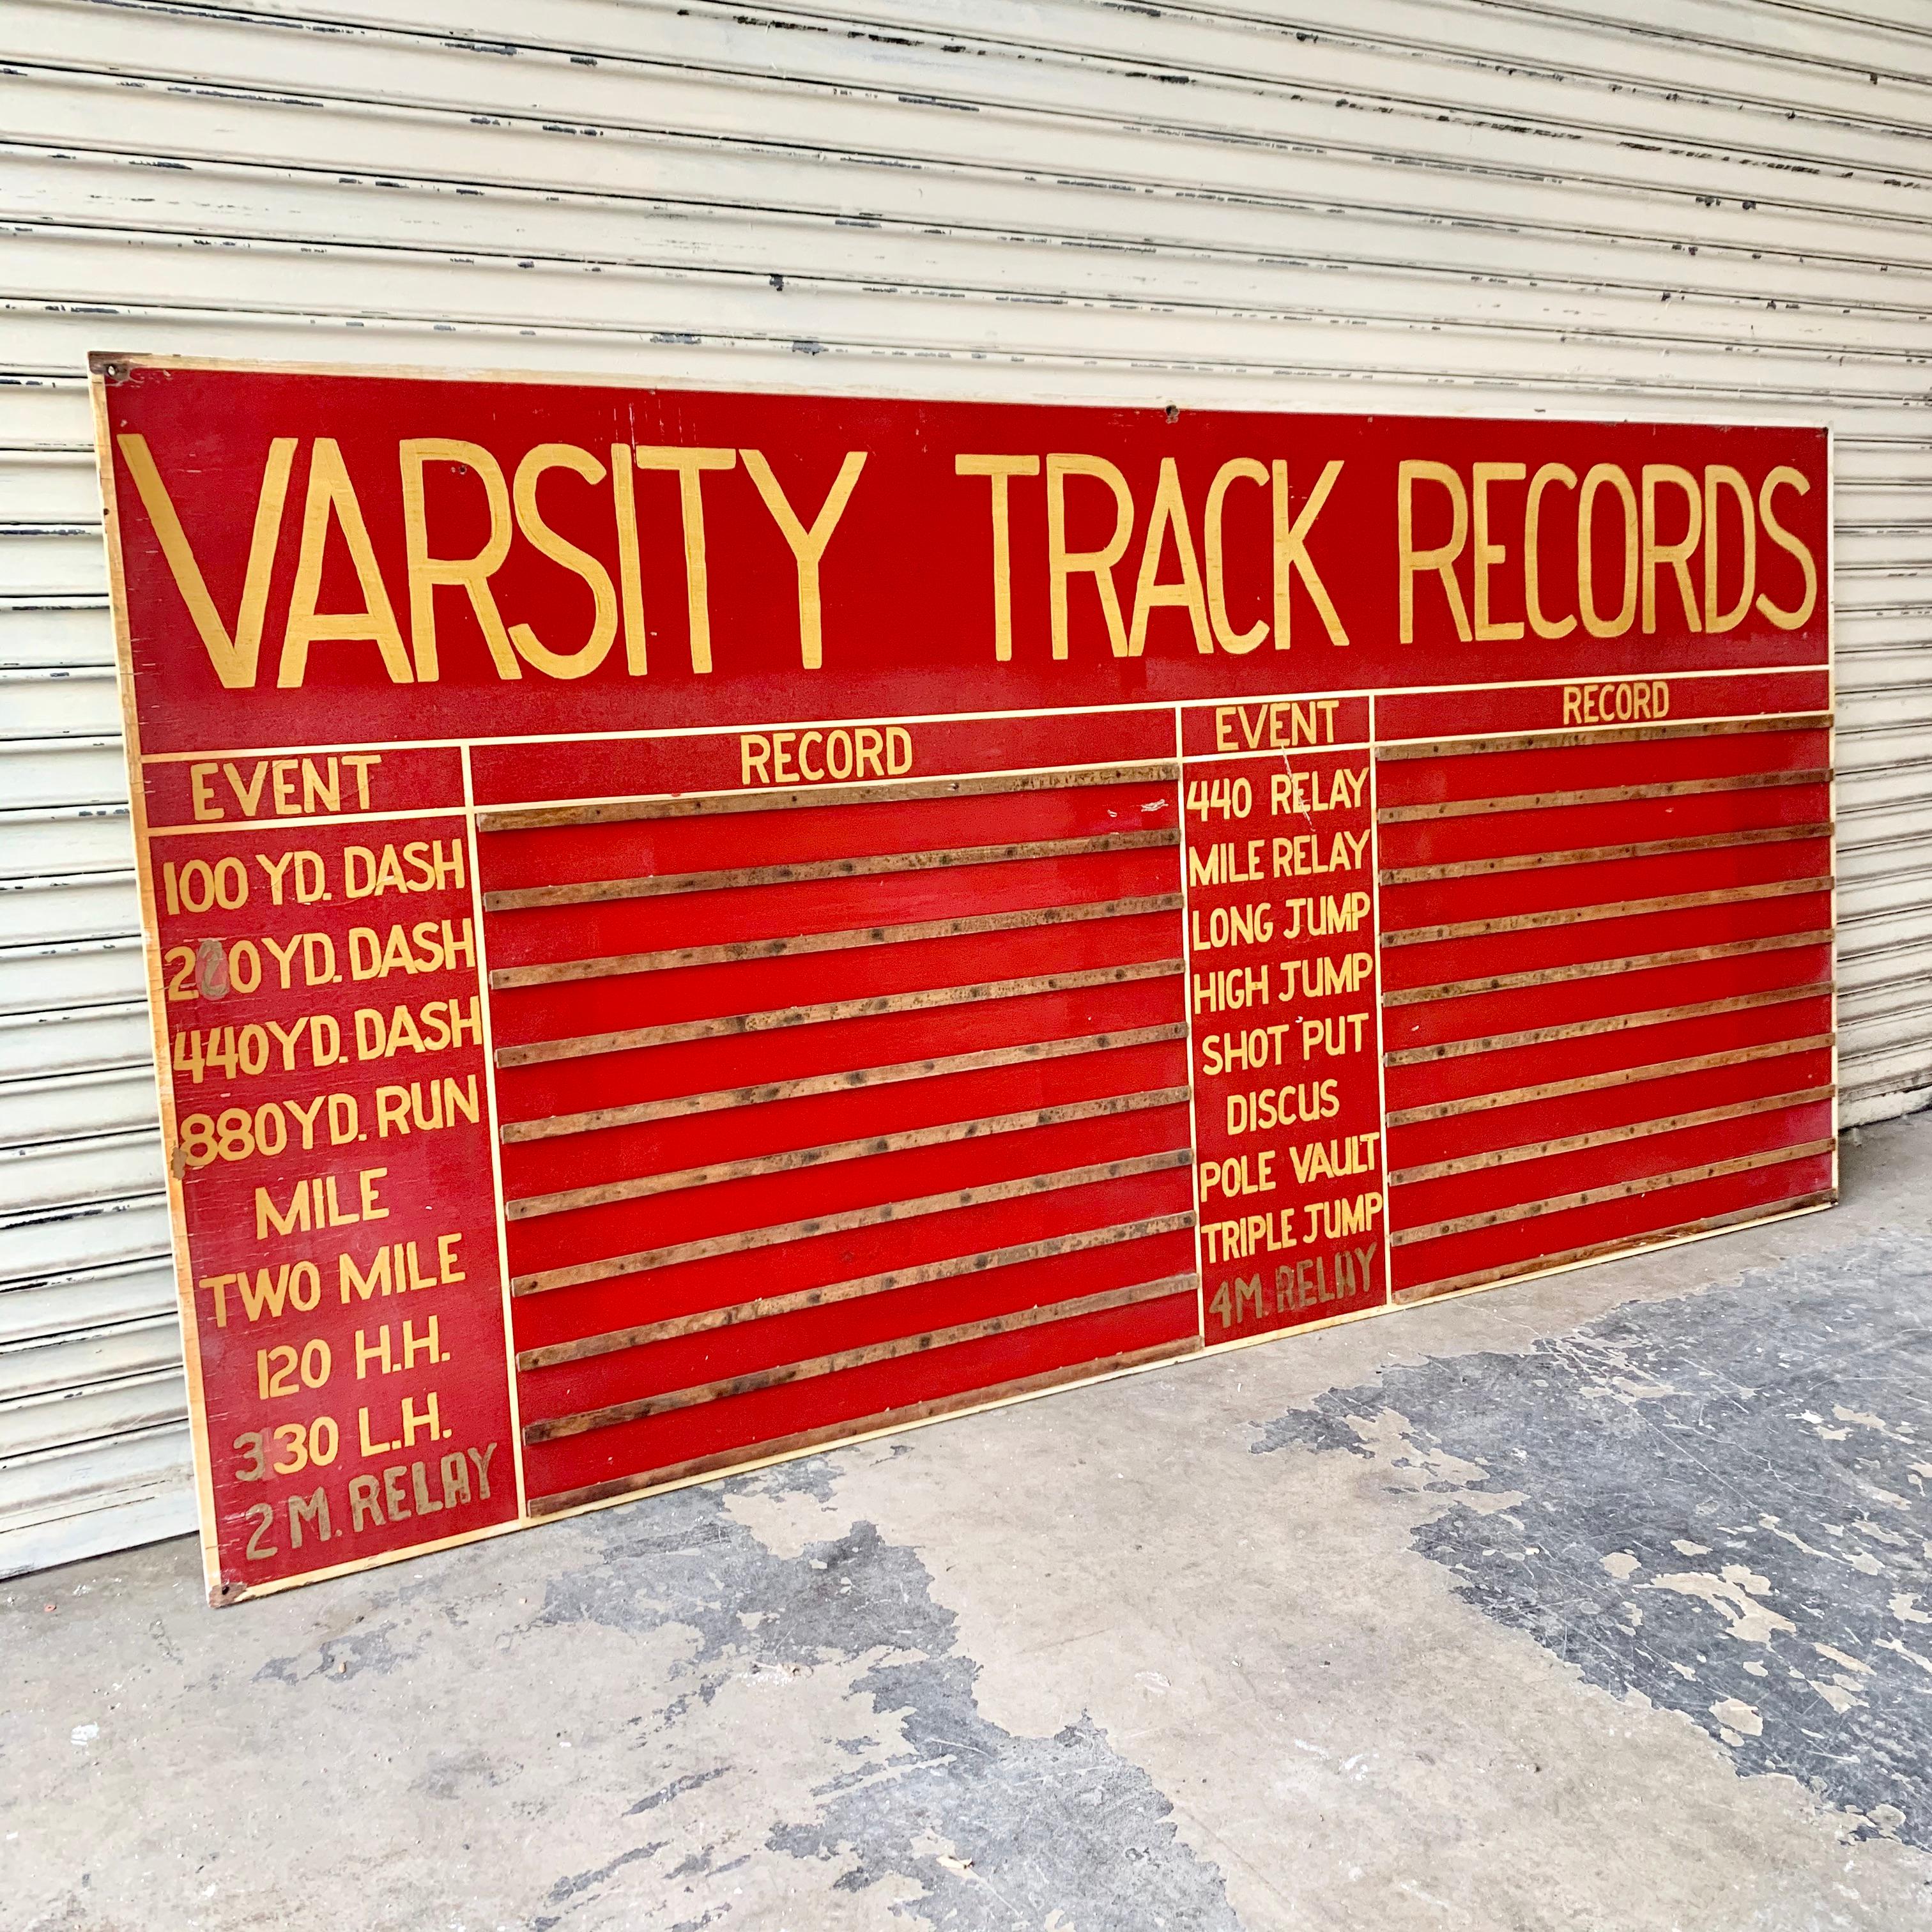 Varsity track and field sign from the early 1970s. Hand painted red sign with yellow lettering. Horizontal wood slates to hold name cards of record holders. Measures: 8 feet wide, 4 feet tall. Great coloring and presence. Good vintage